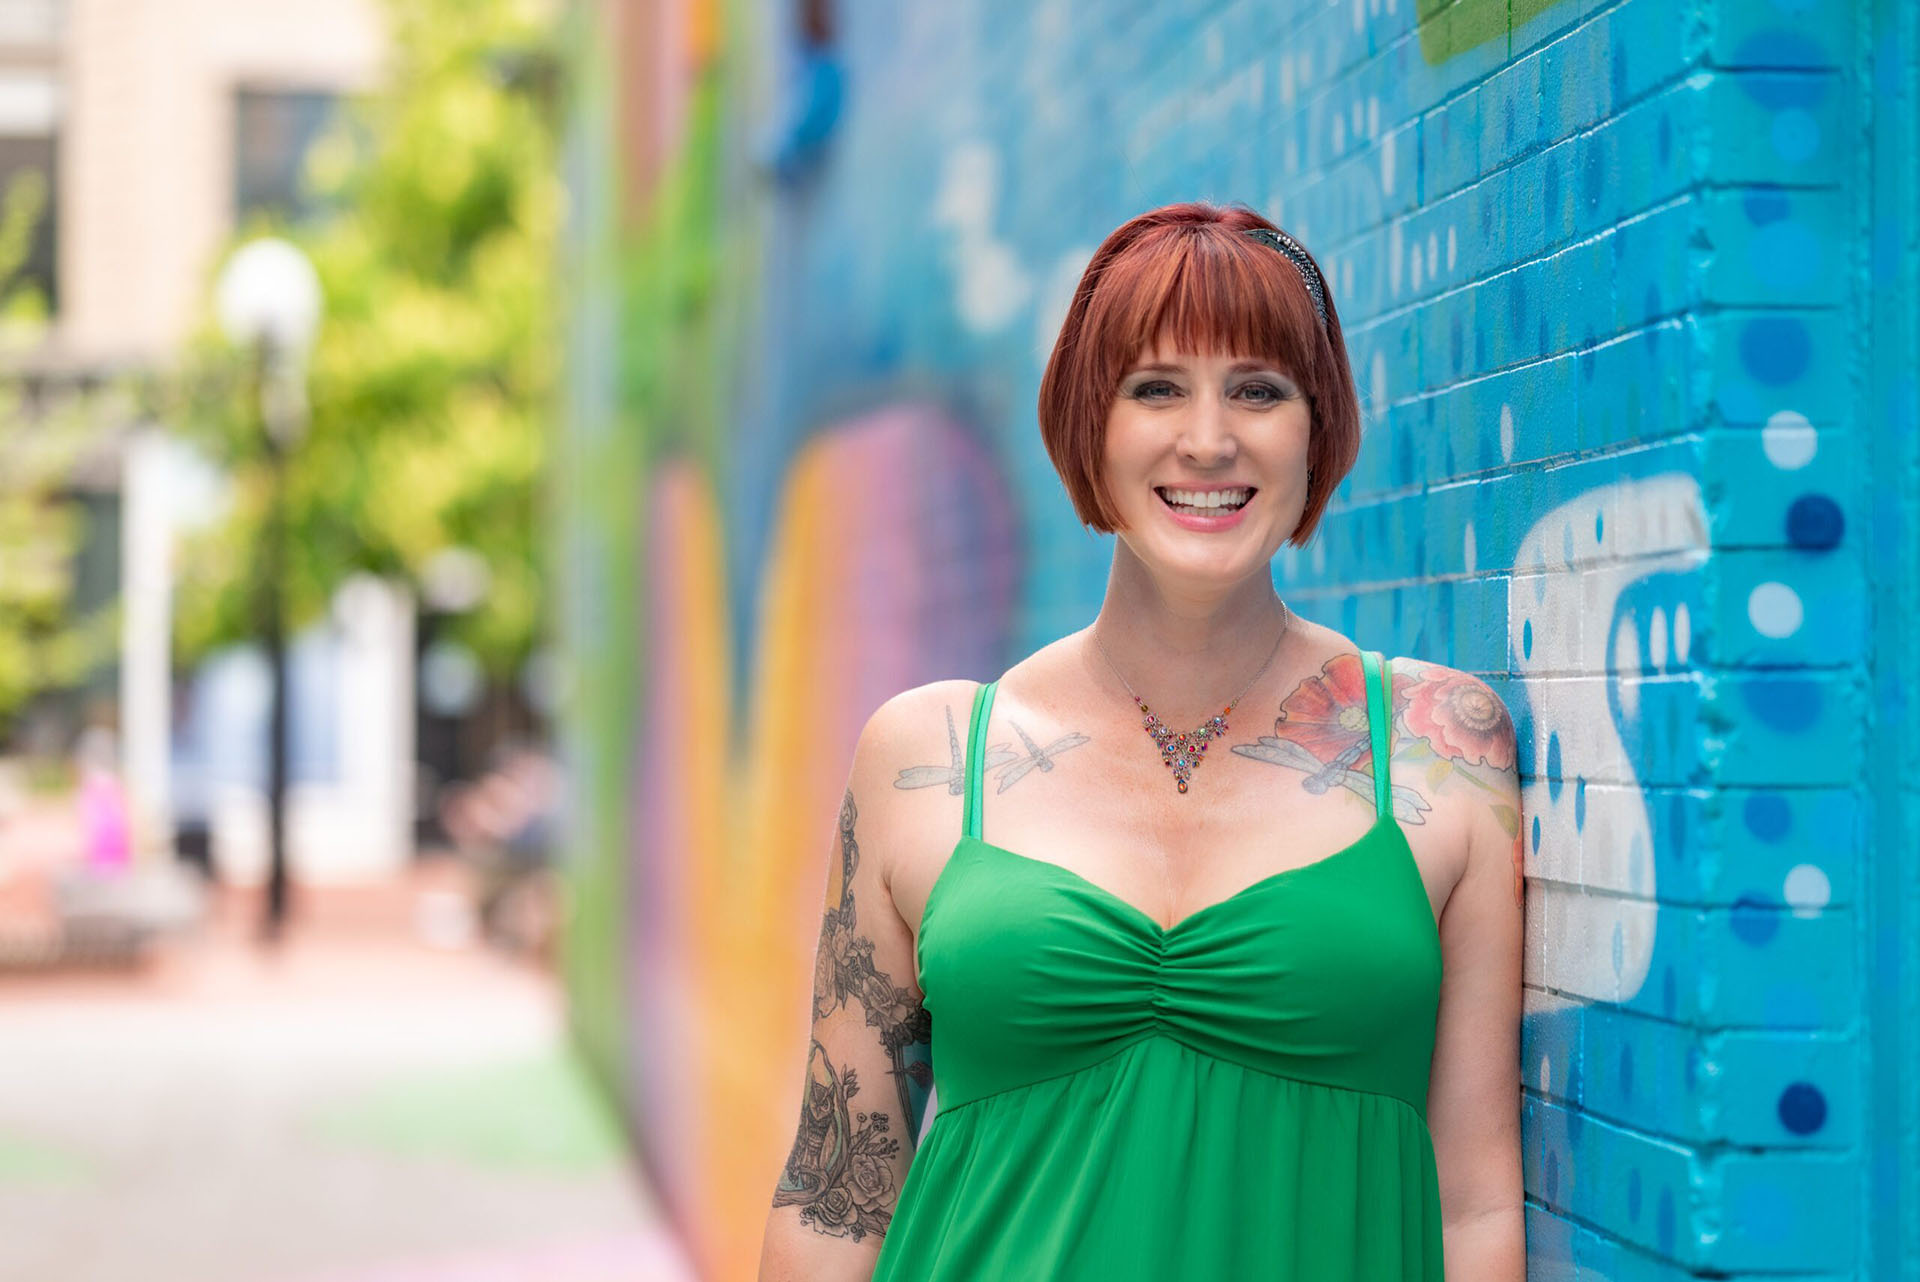 Stephanie Sprenger is wearing a green dress that lets her dragonfly tattoos show, standing in front of a mural.